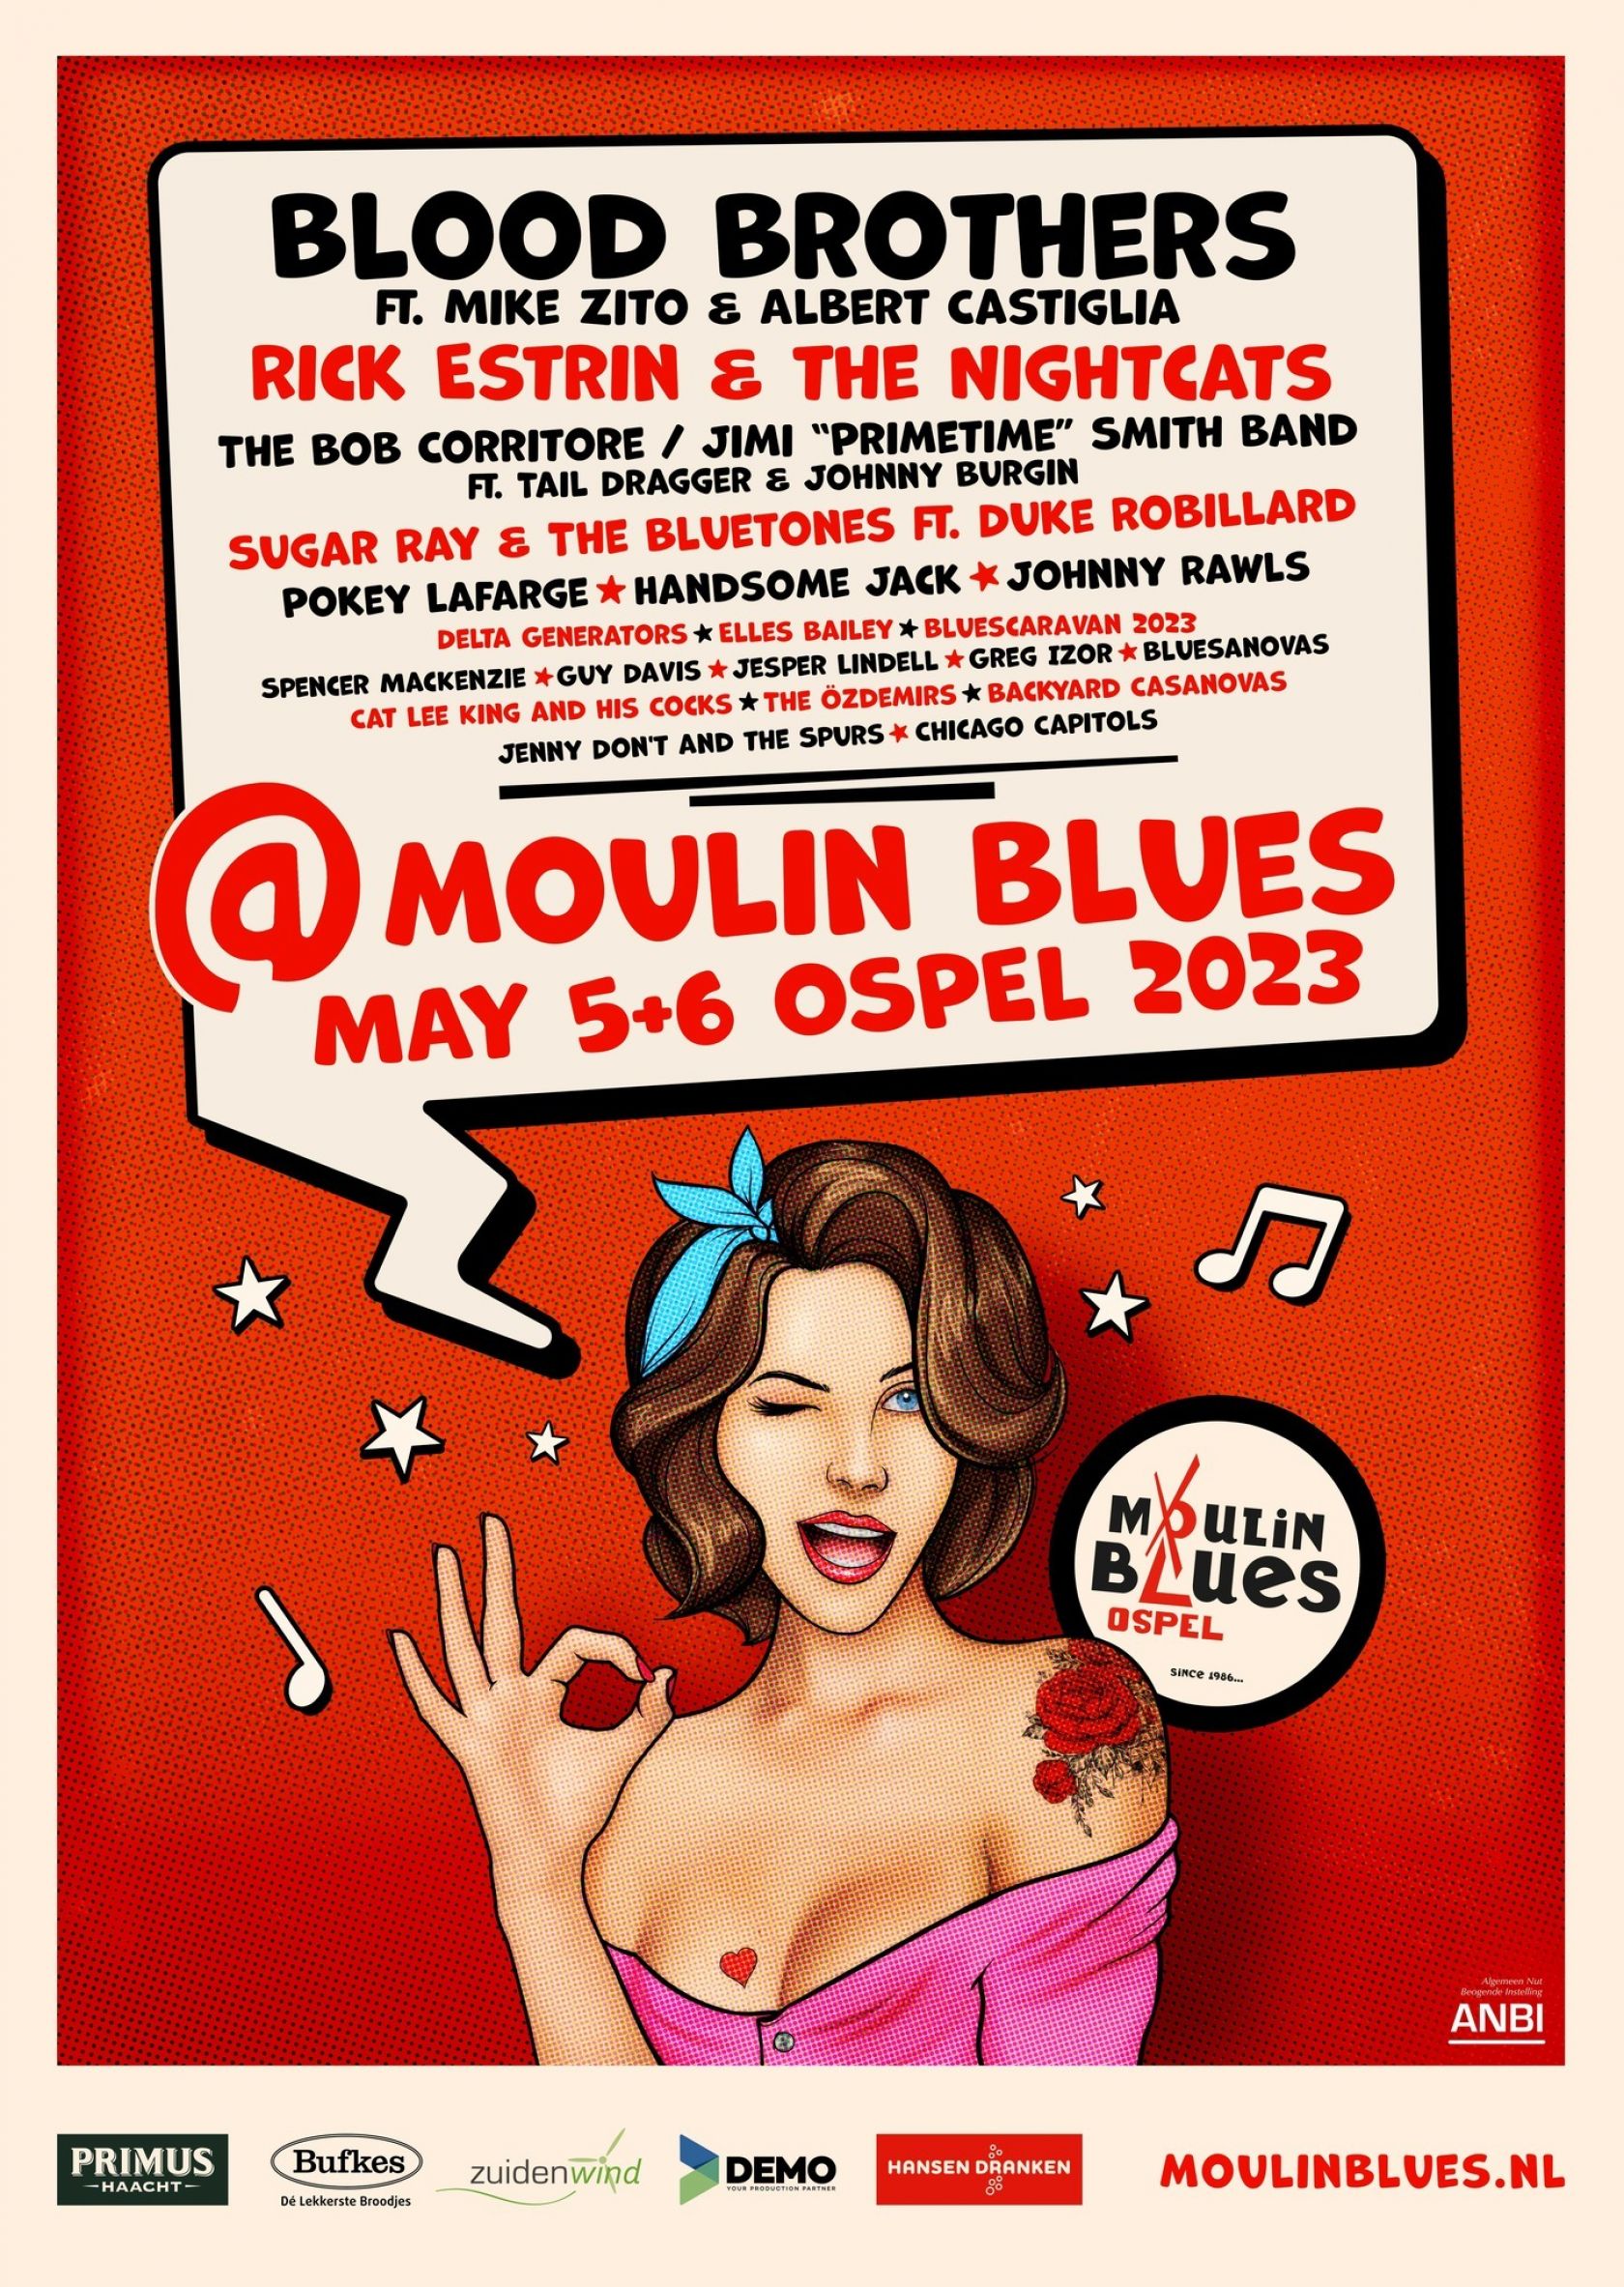 Moulin blues poster 2023